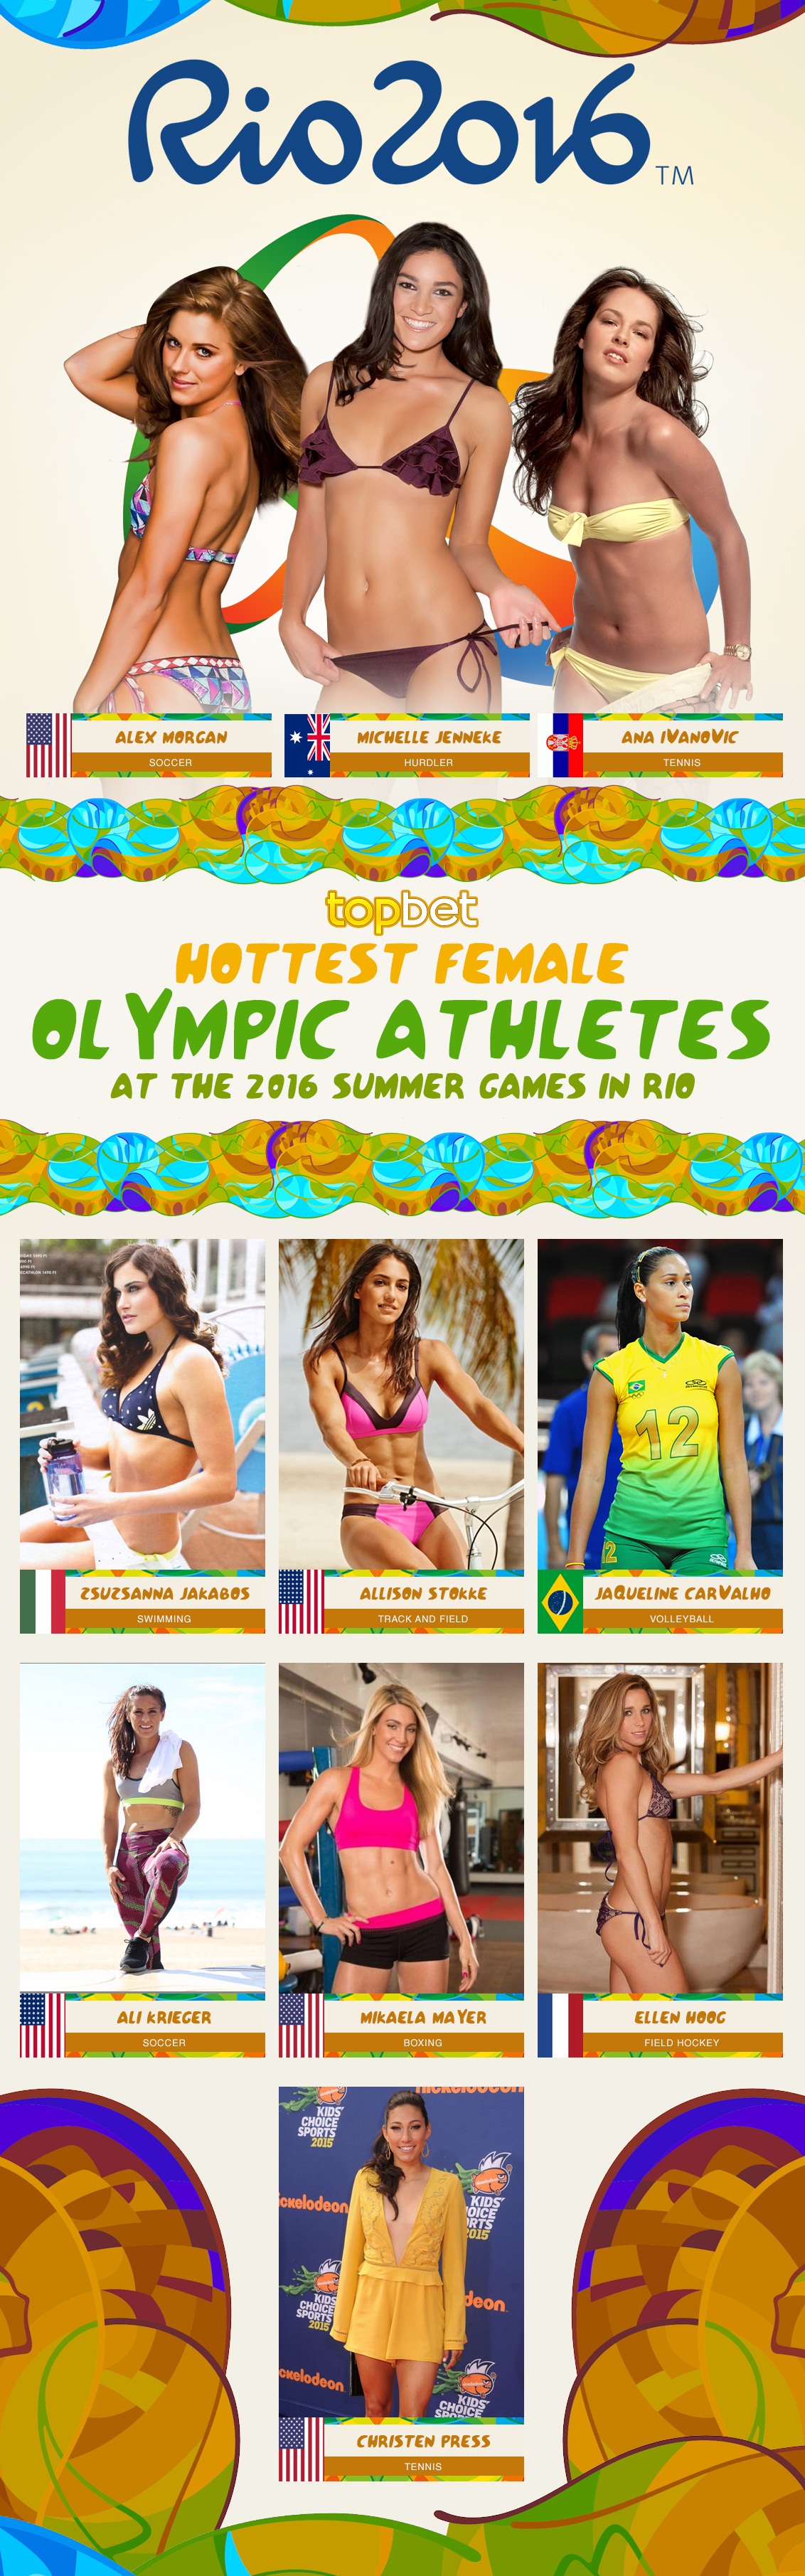 Hottest Female Olympic Athletes and Olympians - Summer 2016